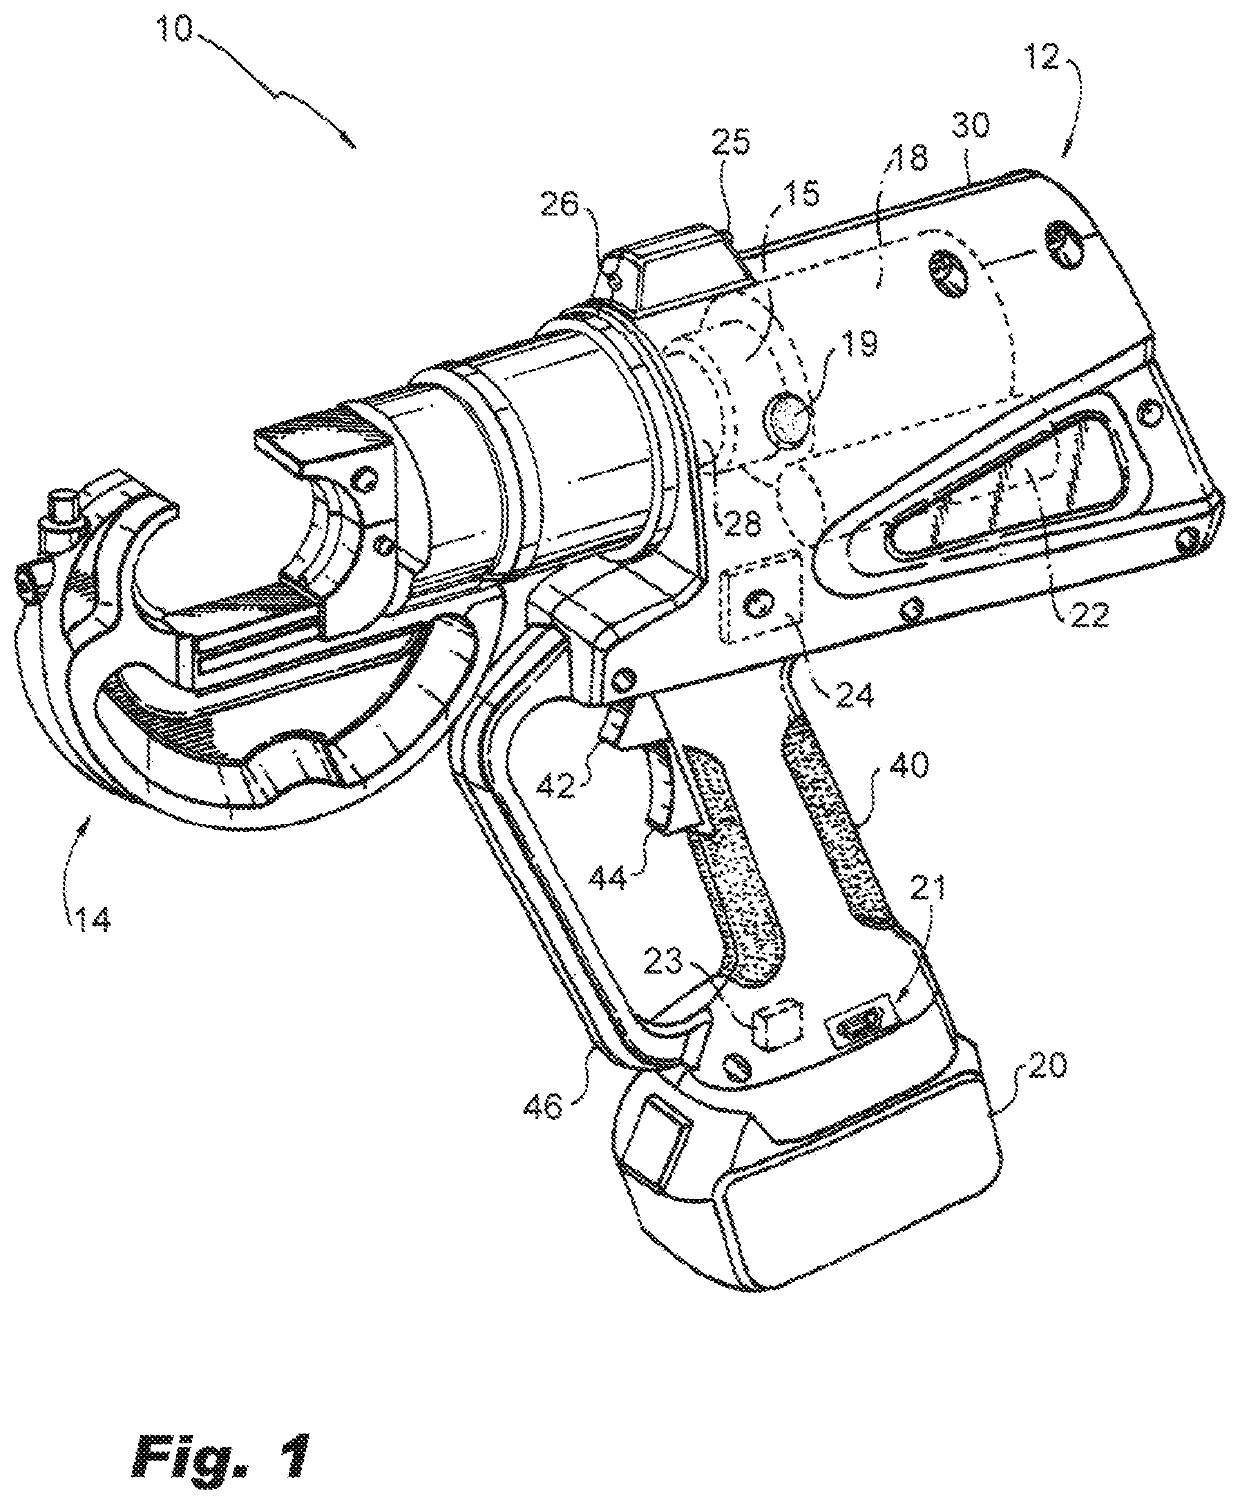 Power tool with crimp localization